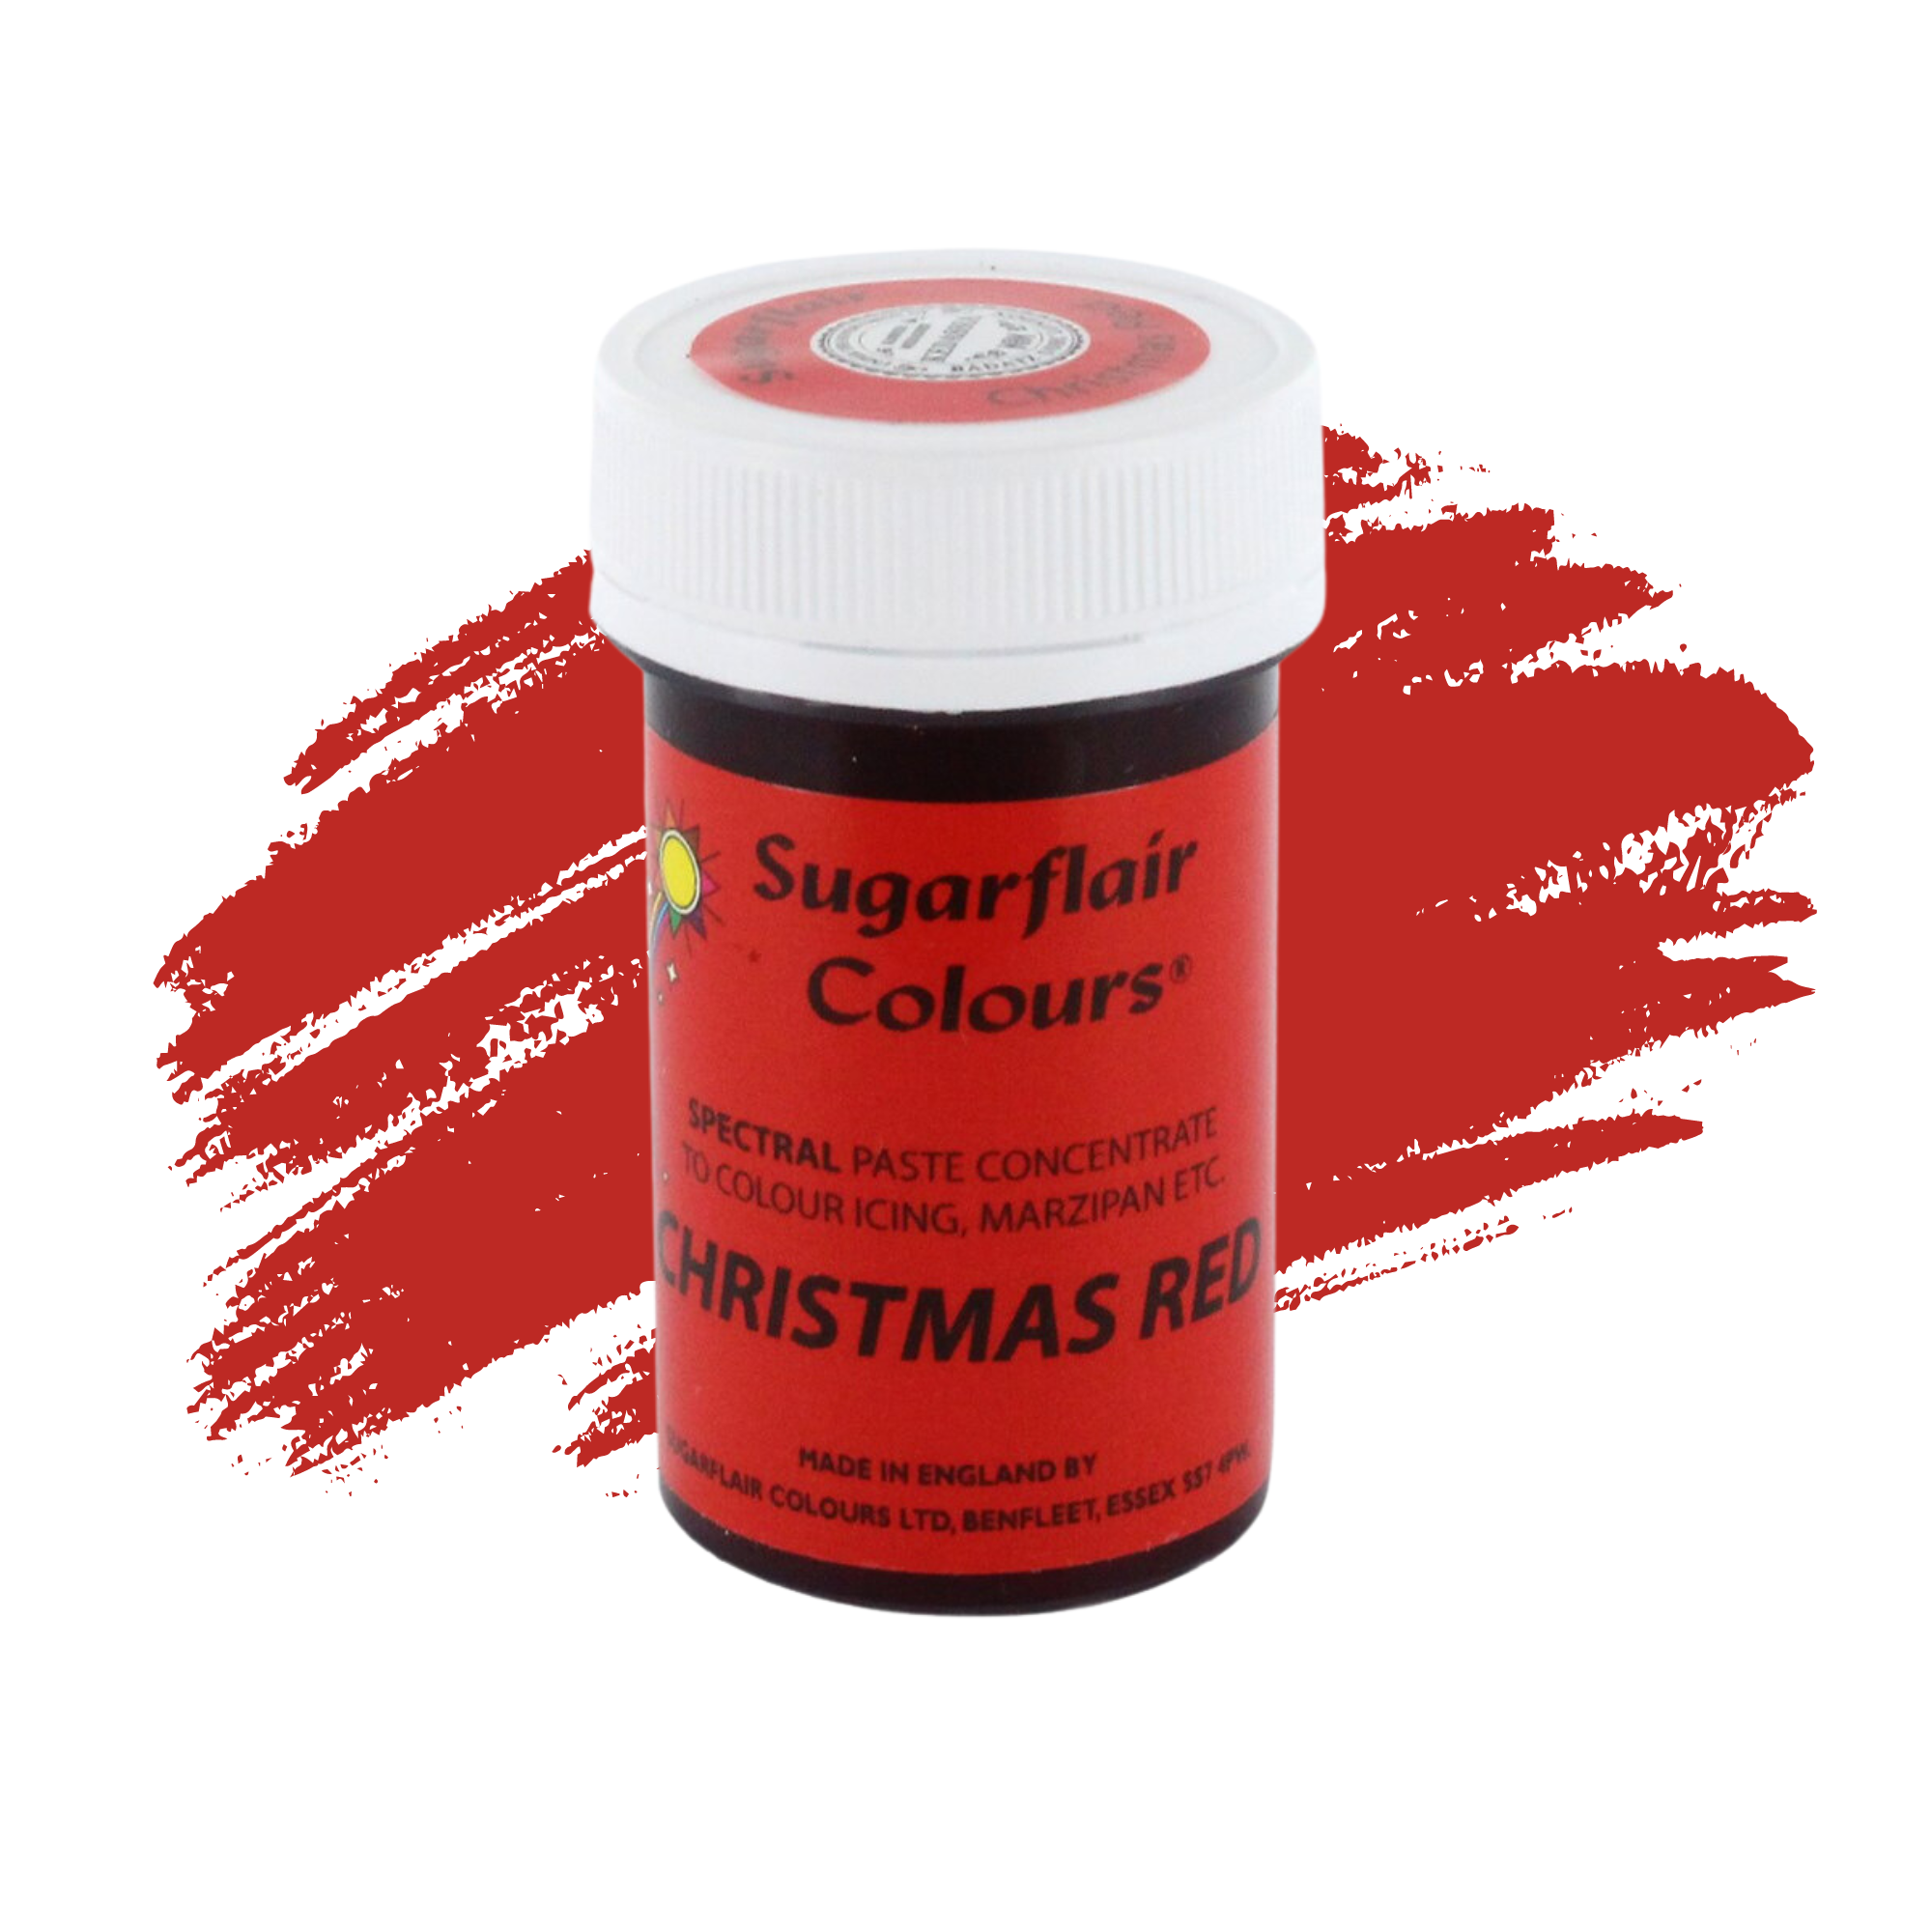 Sugarflair Paste Colours Concentrated Food Colouring - Spectral Christmas Red - 25g